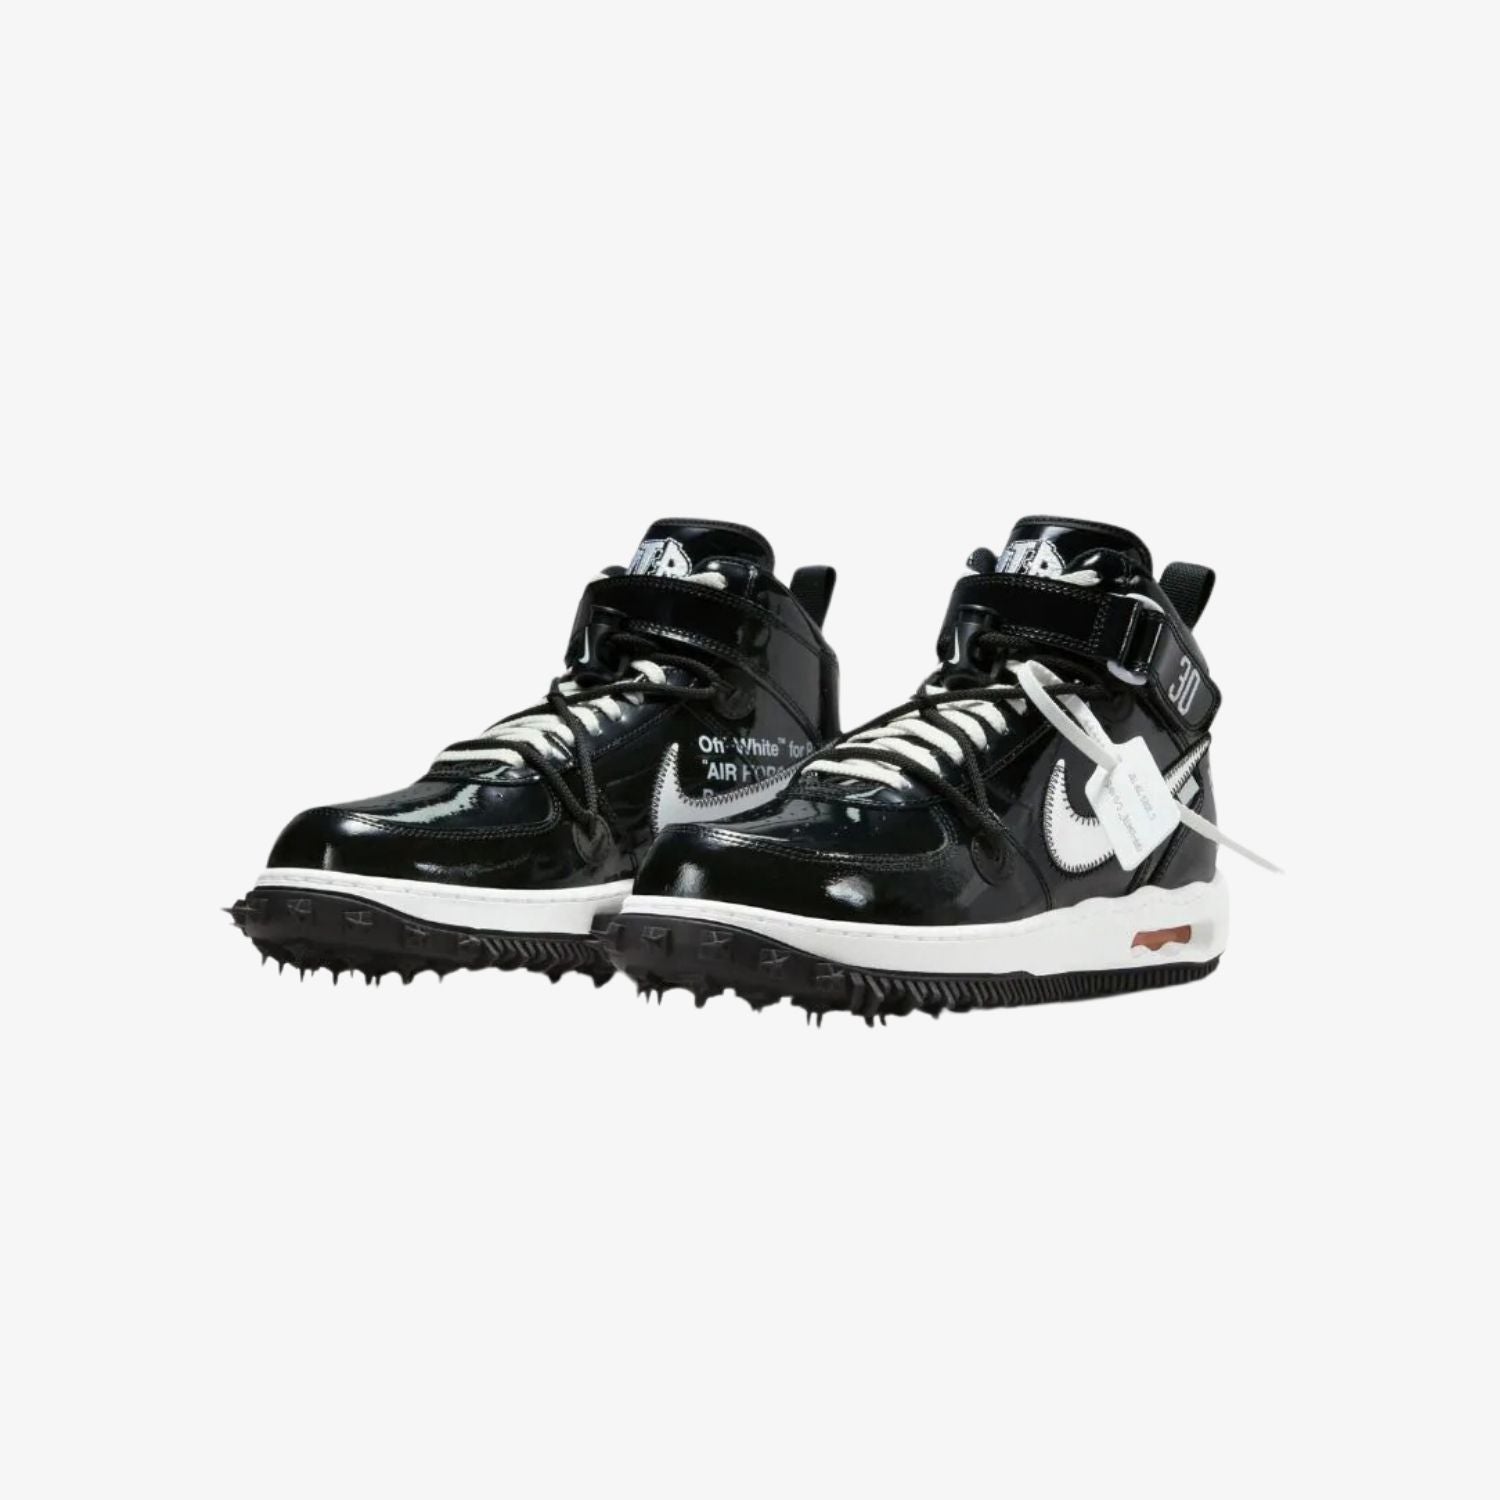 Off-White x Nike Air Force 1 Mid "Space Black"